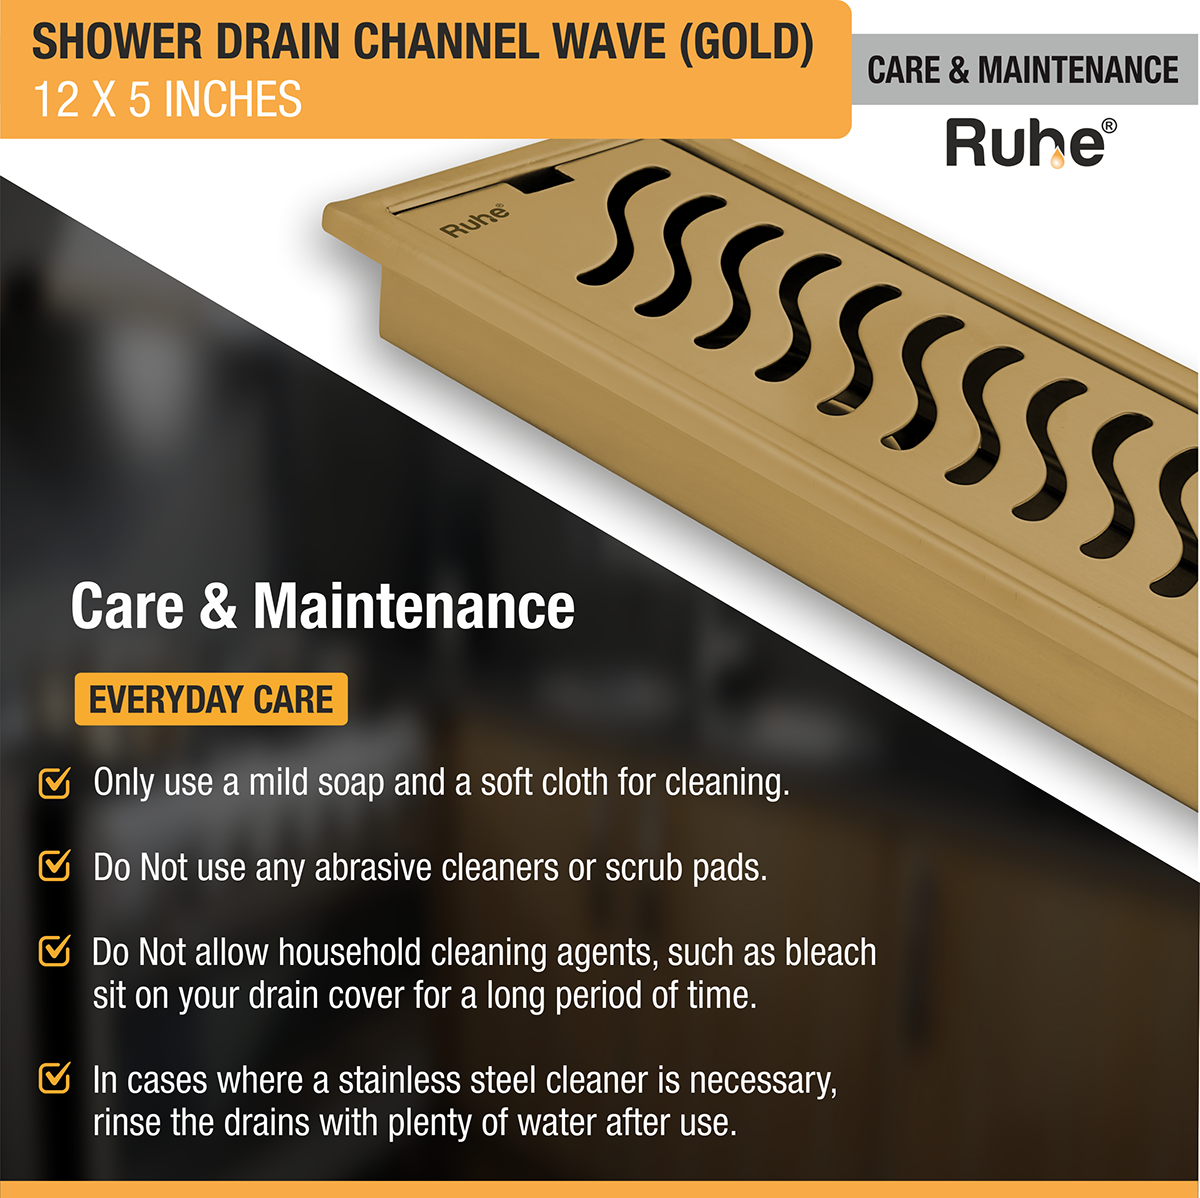 Wave Shower Drain Channel (12 x 5 Inches) YELLOW GOLD care and maintenance